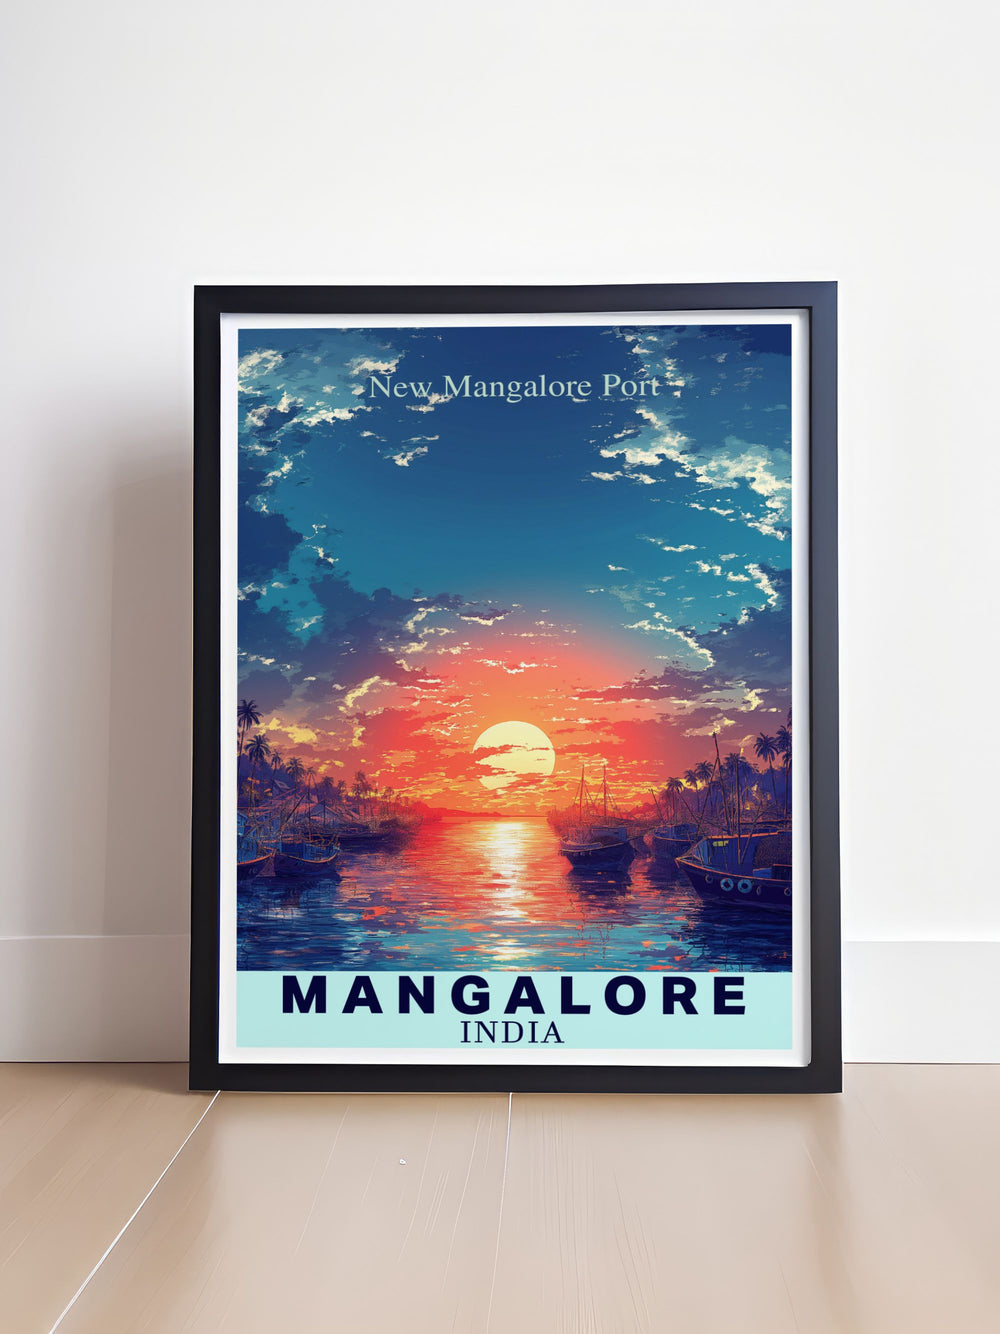 Featuring the scenic beauty of Mangalore, this poster showcases the citys dynamic coastline and lush landscapes, making it an ideal piece for those who appreciate the diverse and vibrant culture of Karnataka.